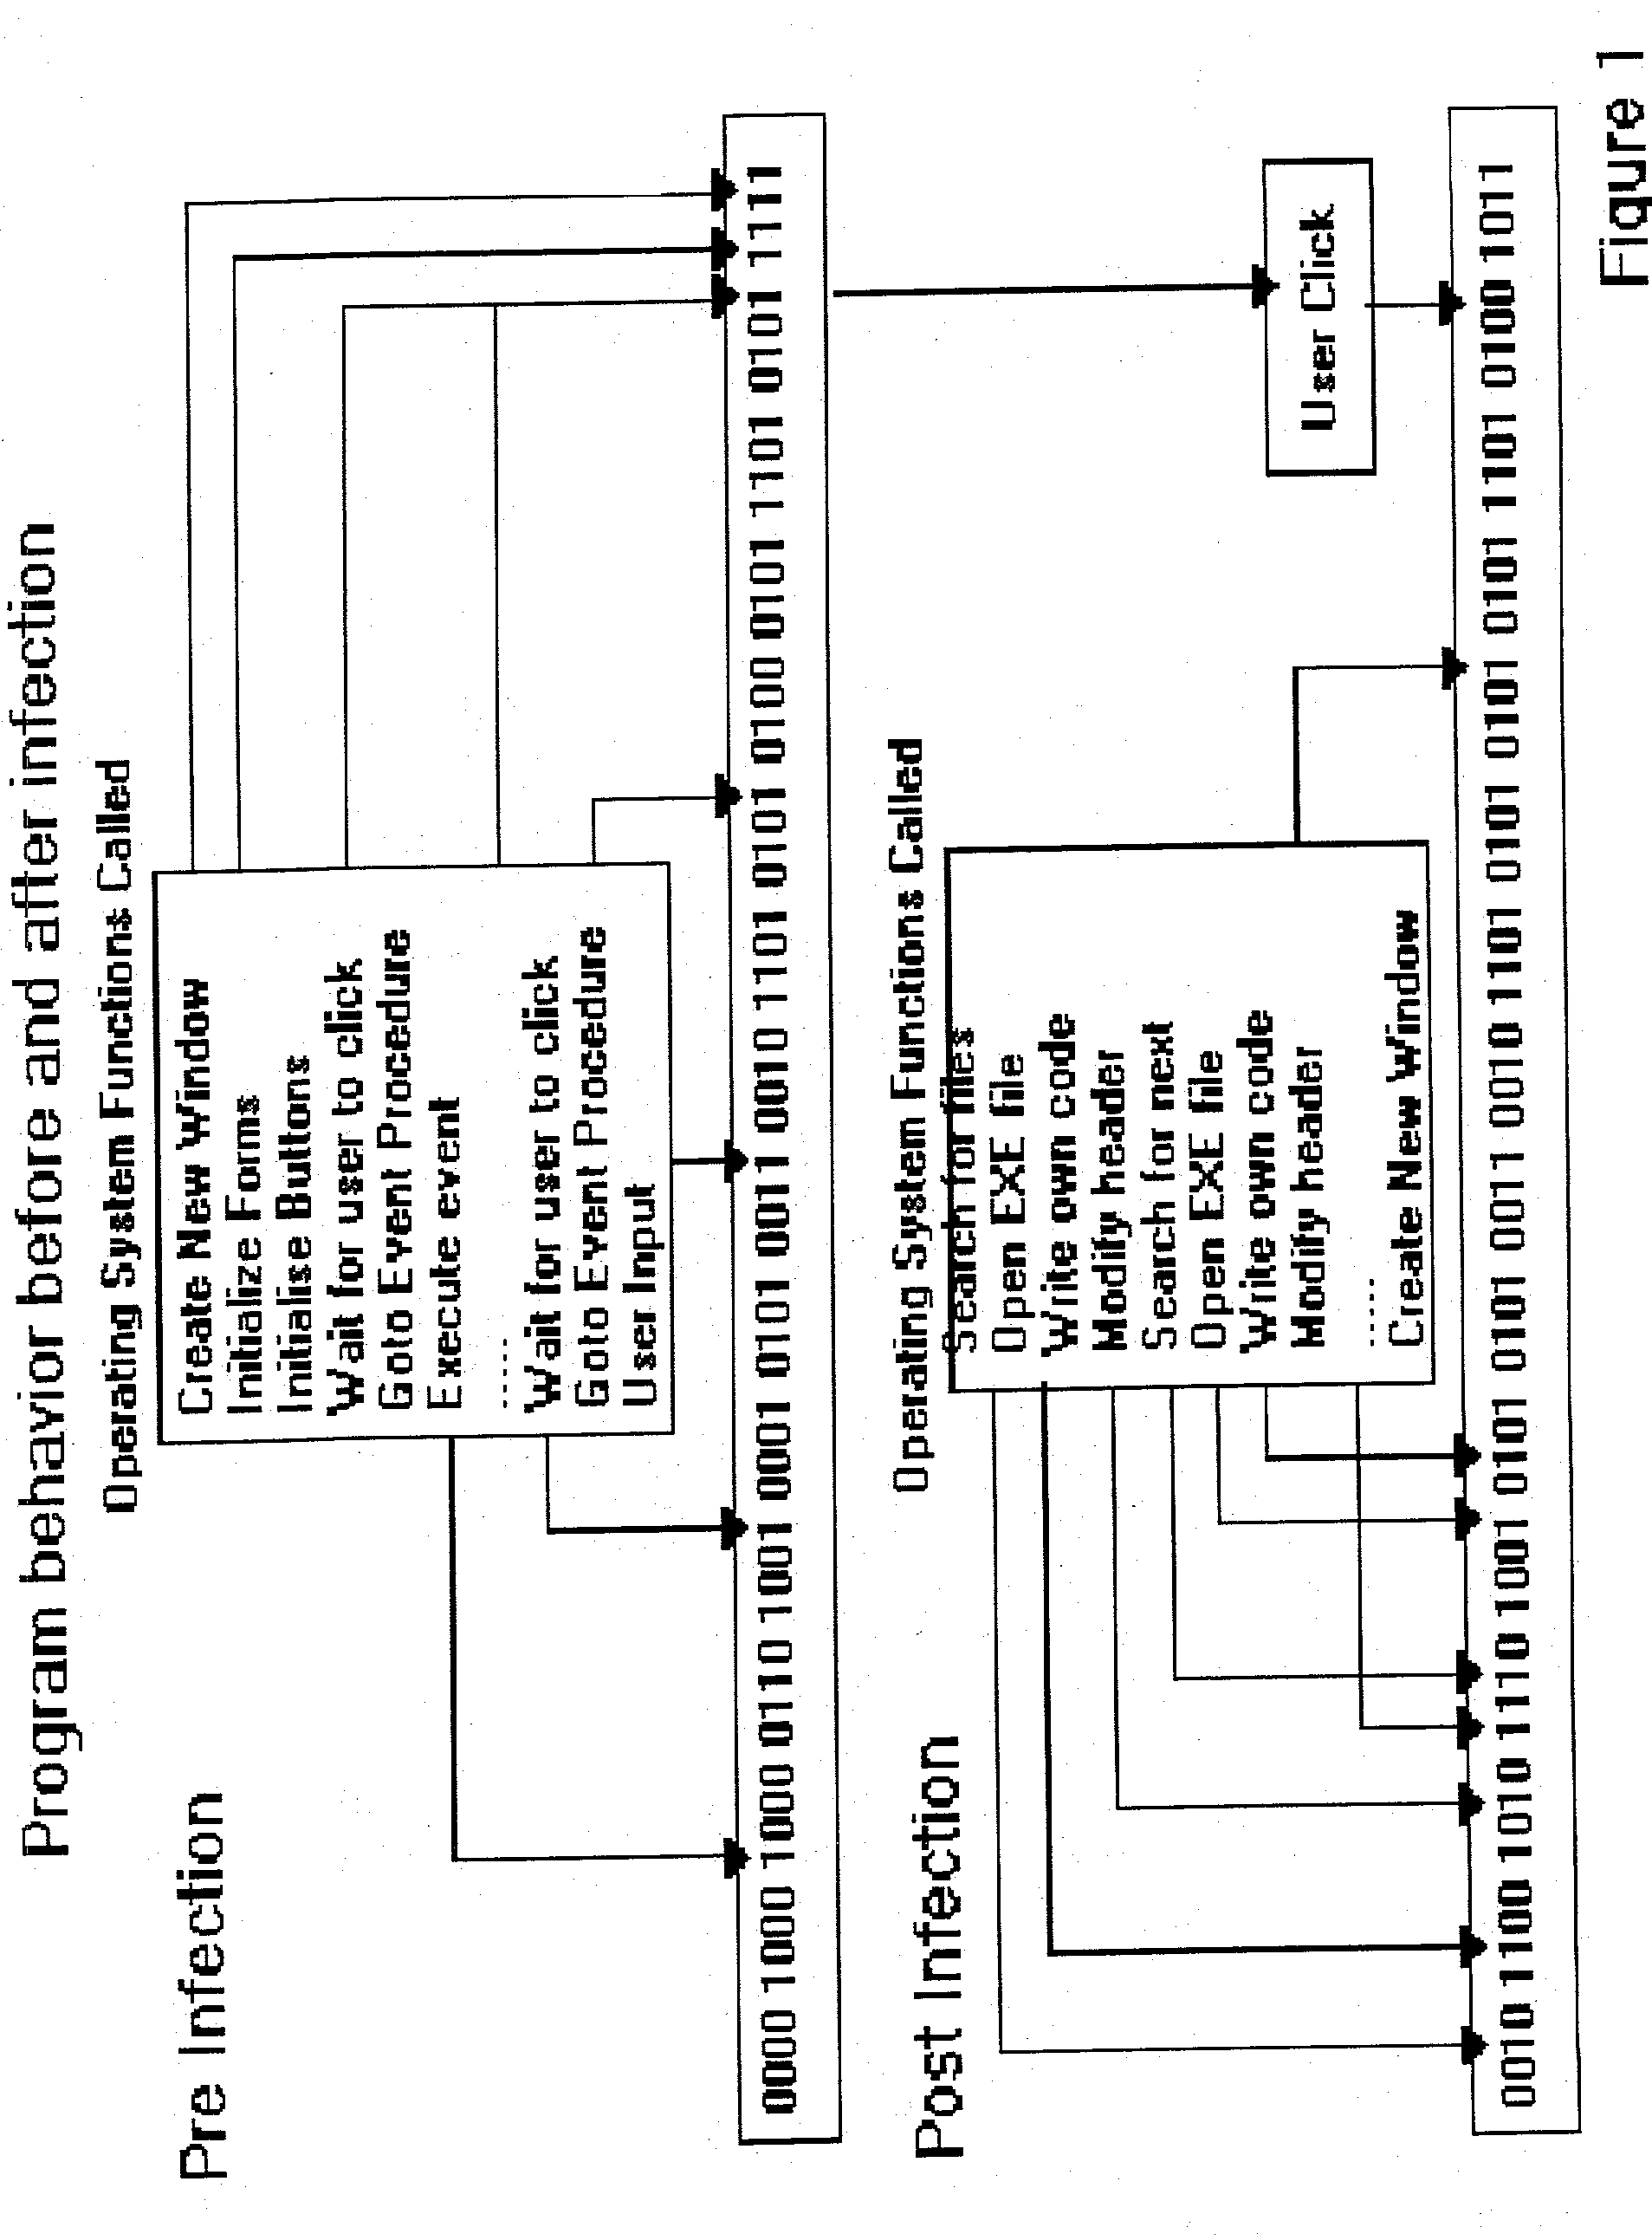 Computer immune system and method for detecting unwanted code in a P-code or partially compiled native-code program executing within a virtual machine